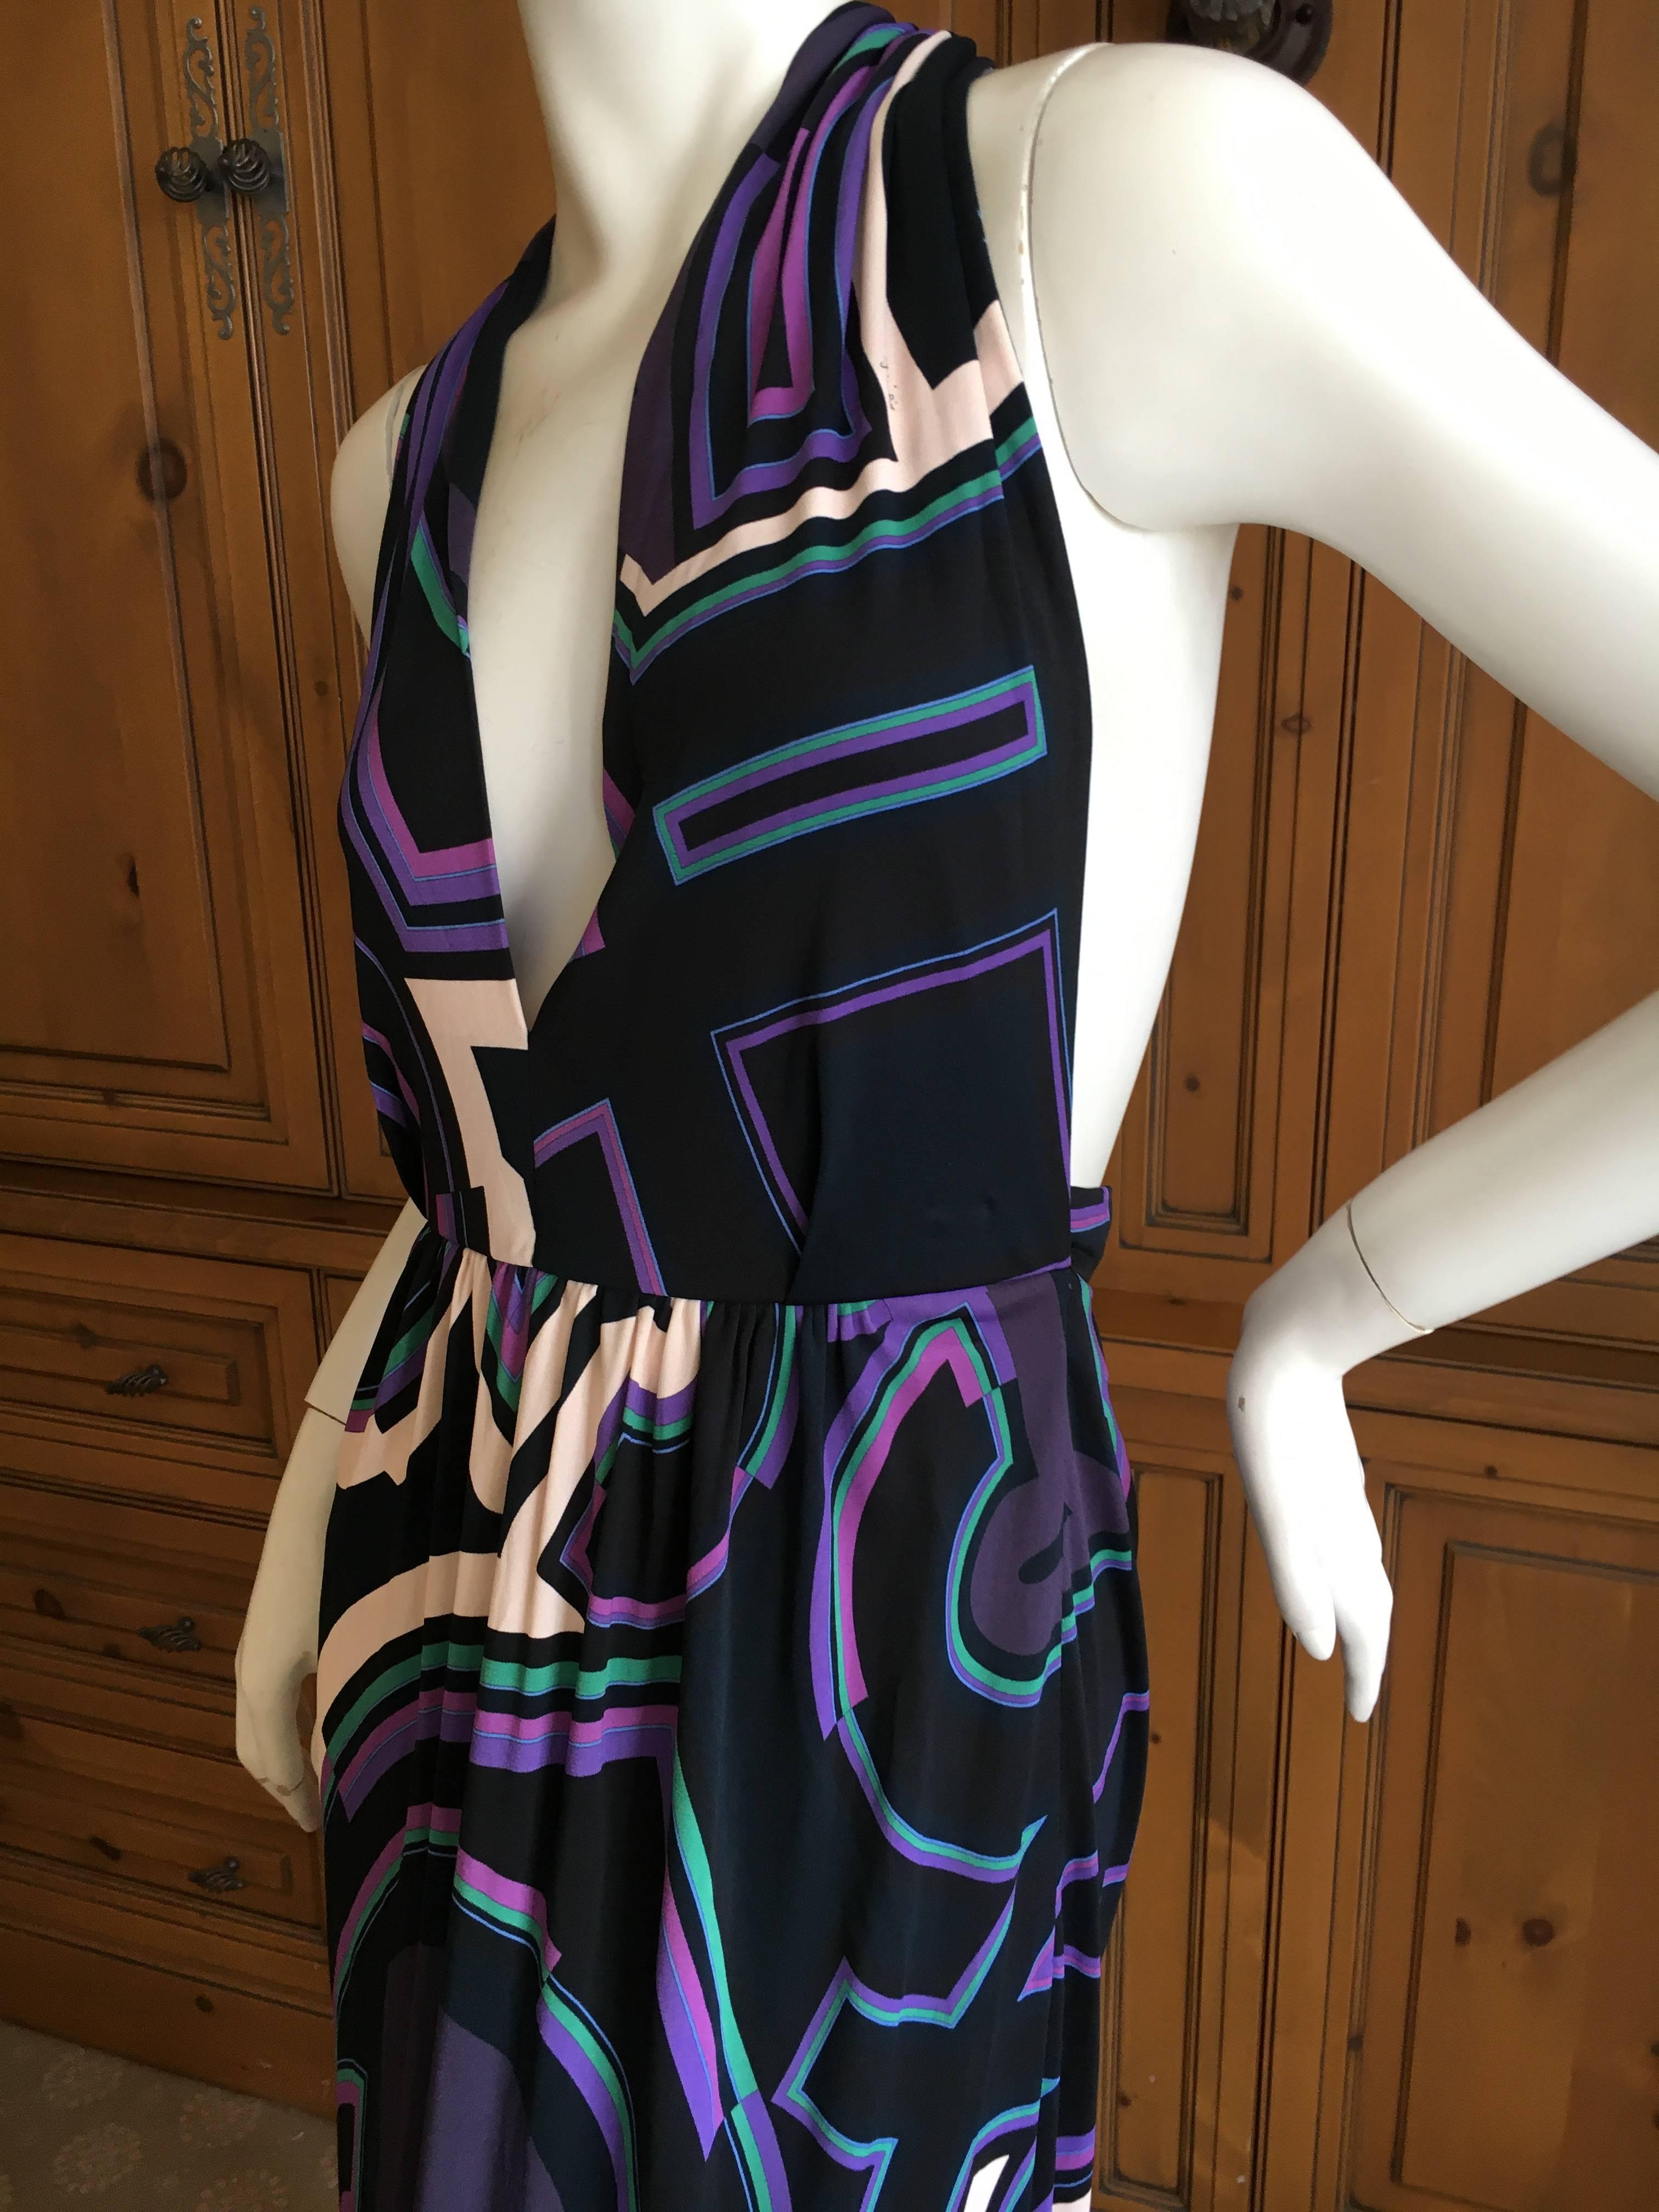 Emelio Pucci Purple Geometric Print Tie Back Halter Dress.
This is so sweet, ties in the back with long floor sweeping ties.
Size 34
Bust 36